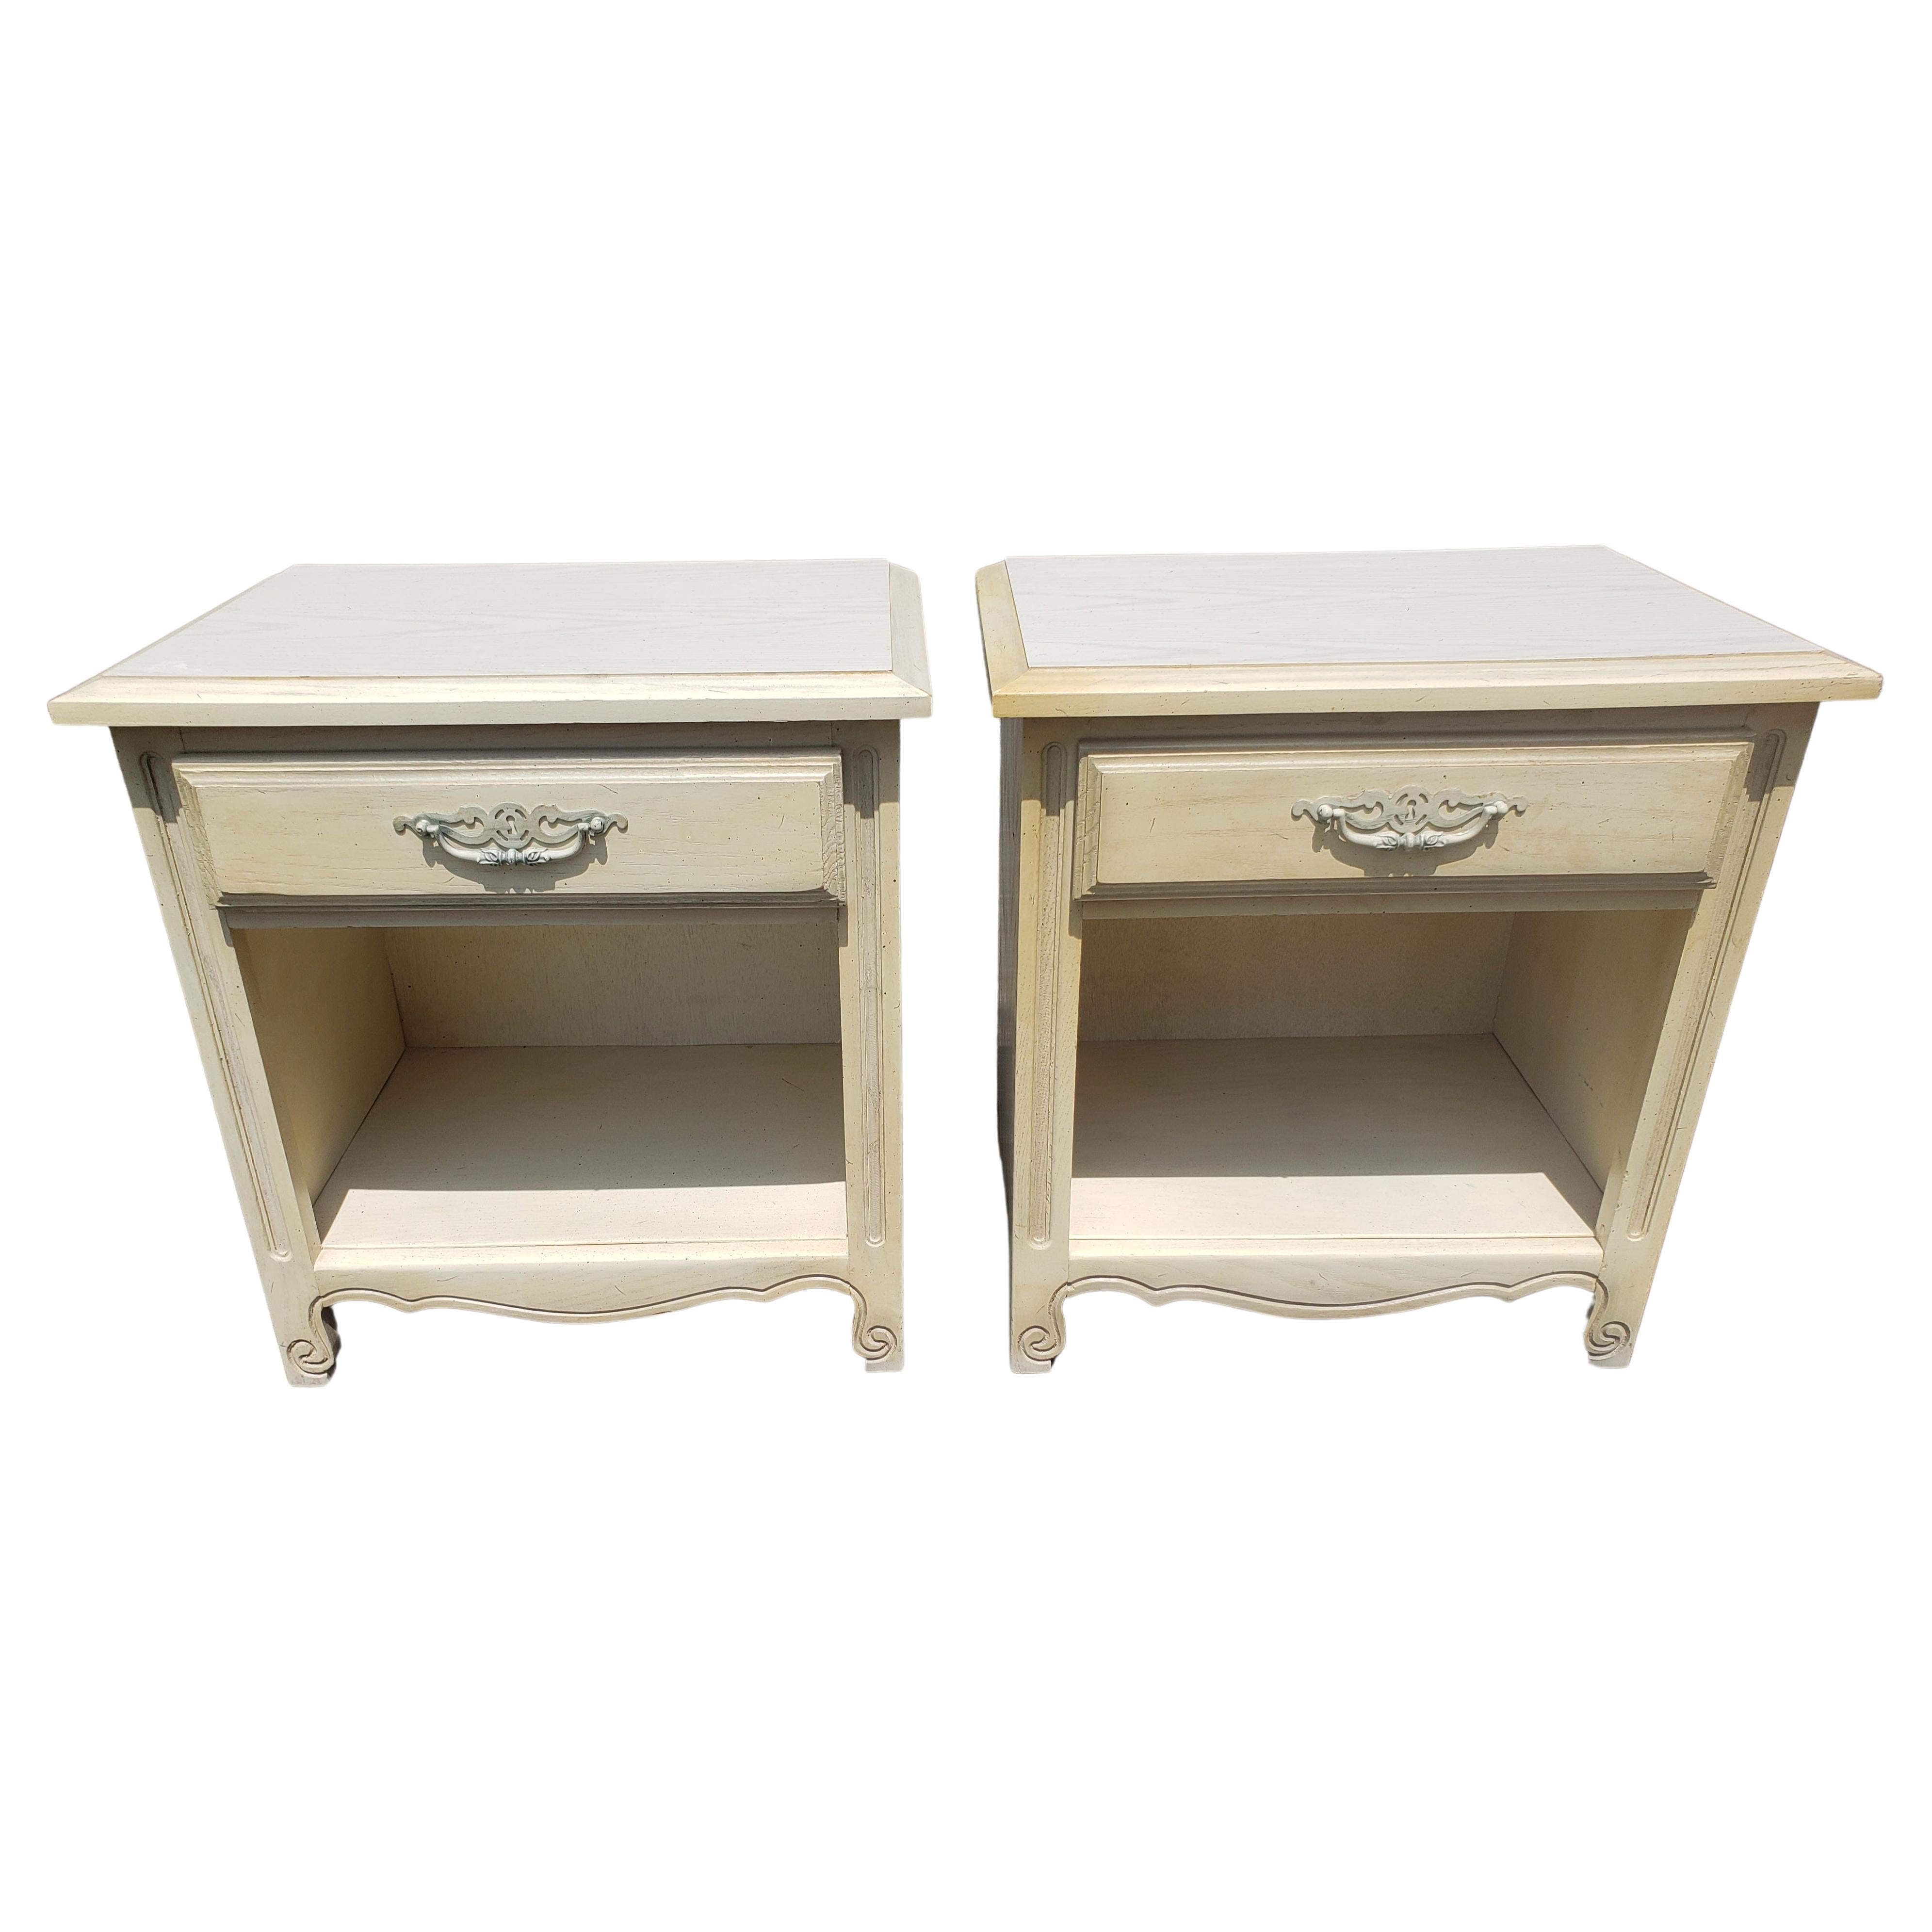 Late 20th Century Vintage Kenlea Crafts Solid Oak French Provincial Bedside Tables, a Pair For Sale